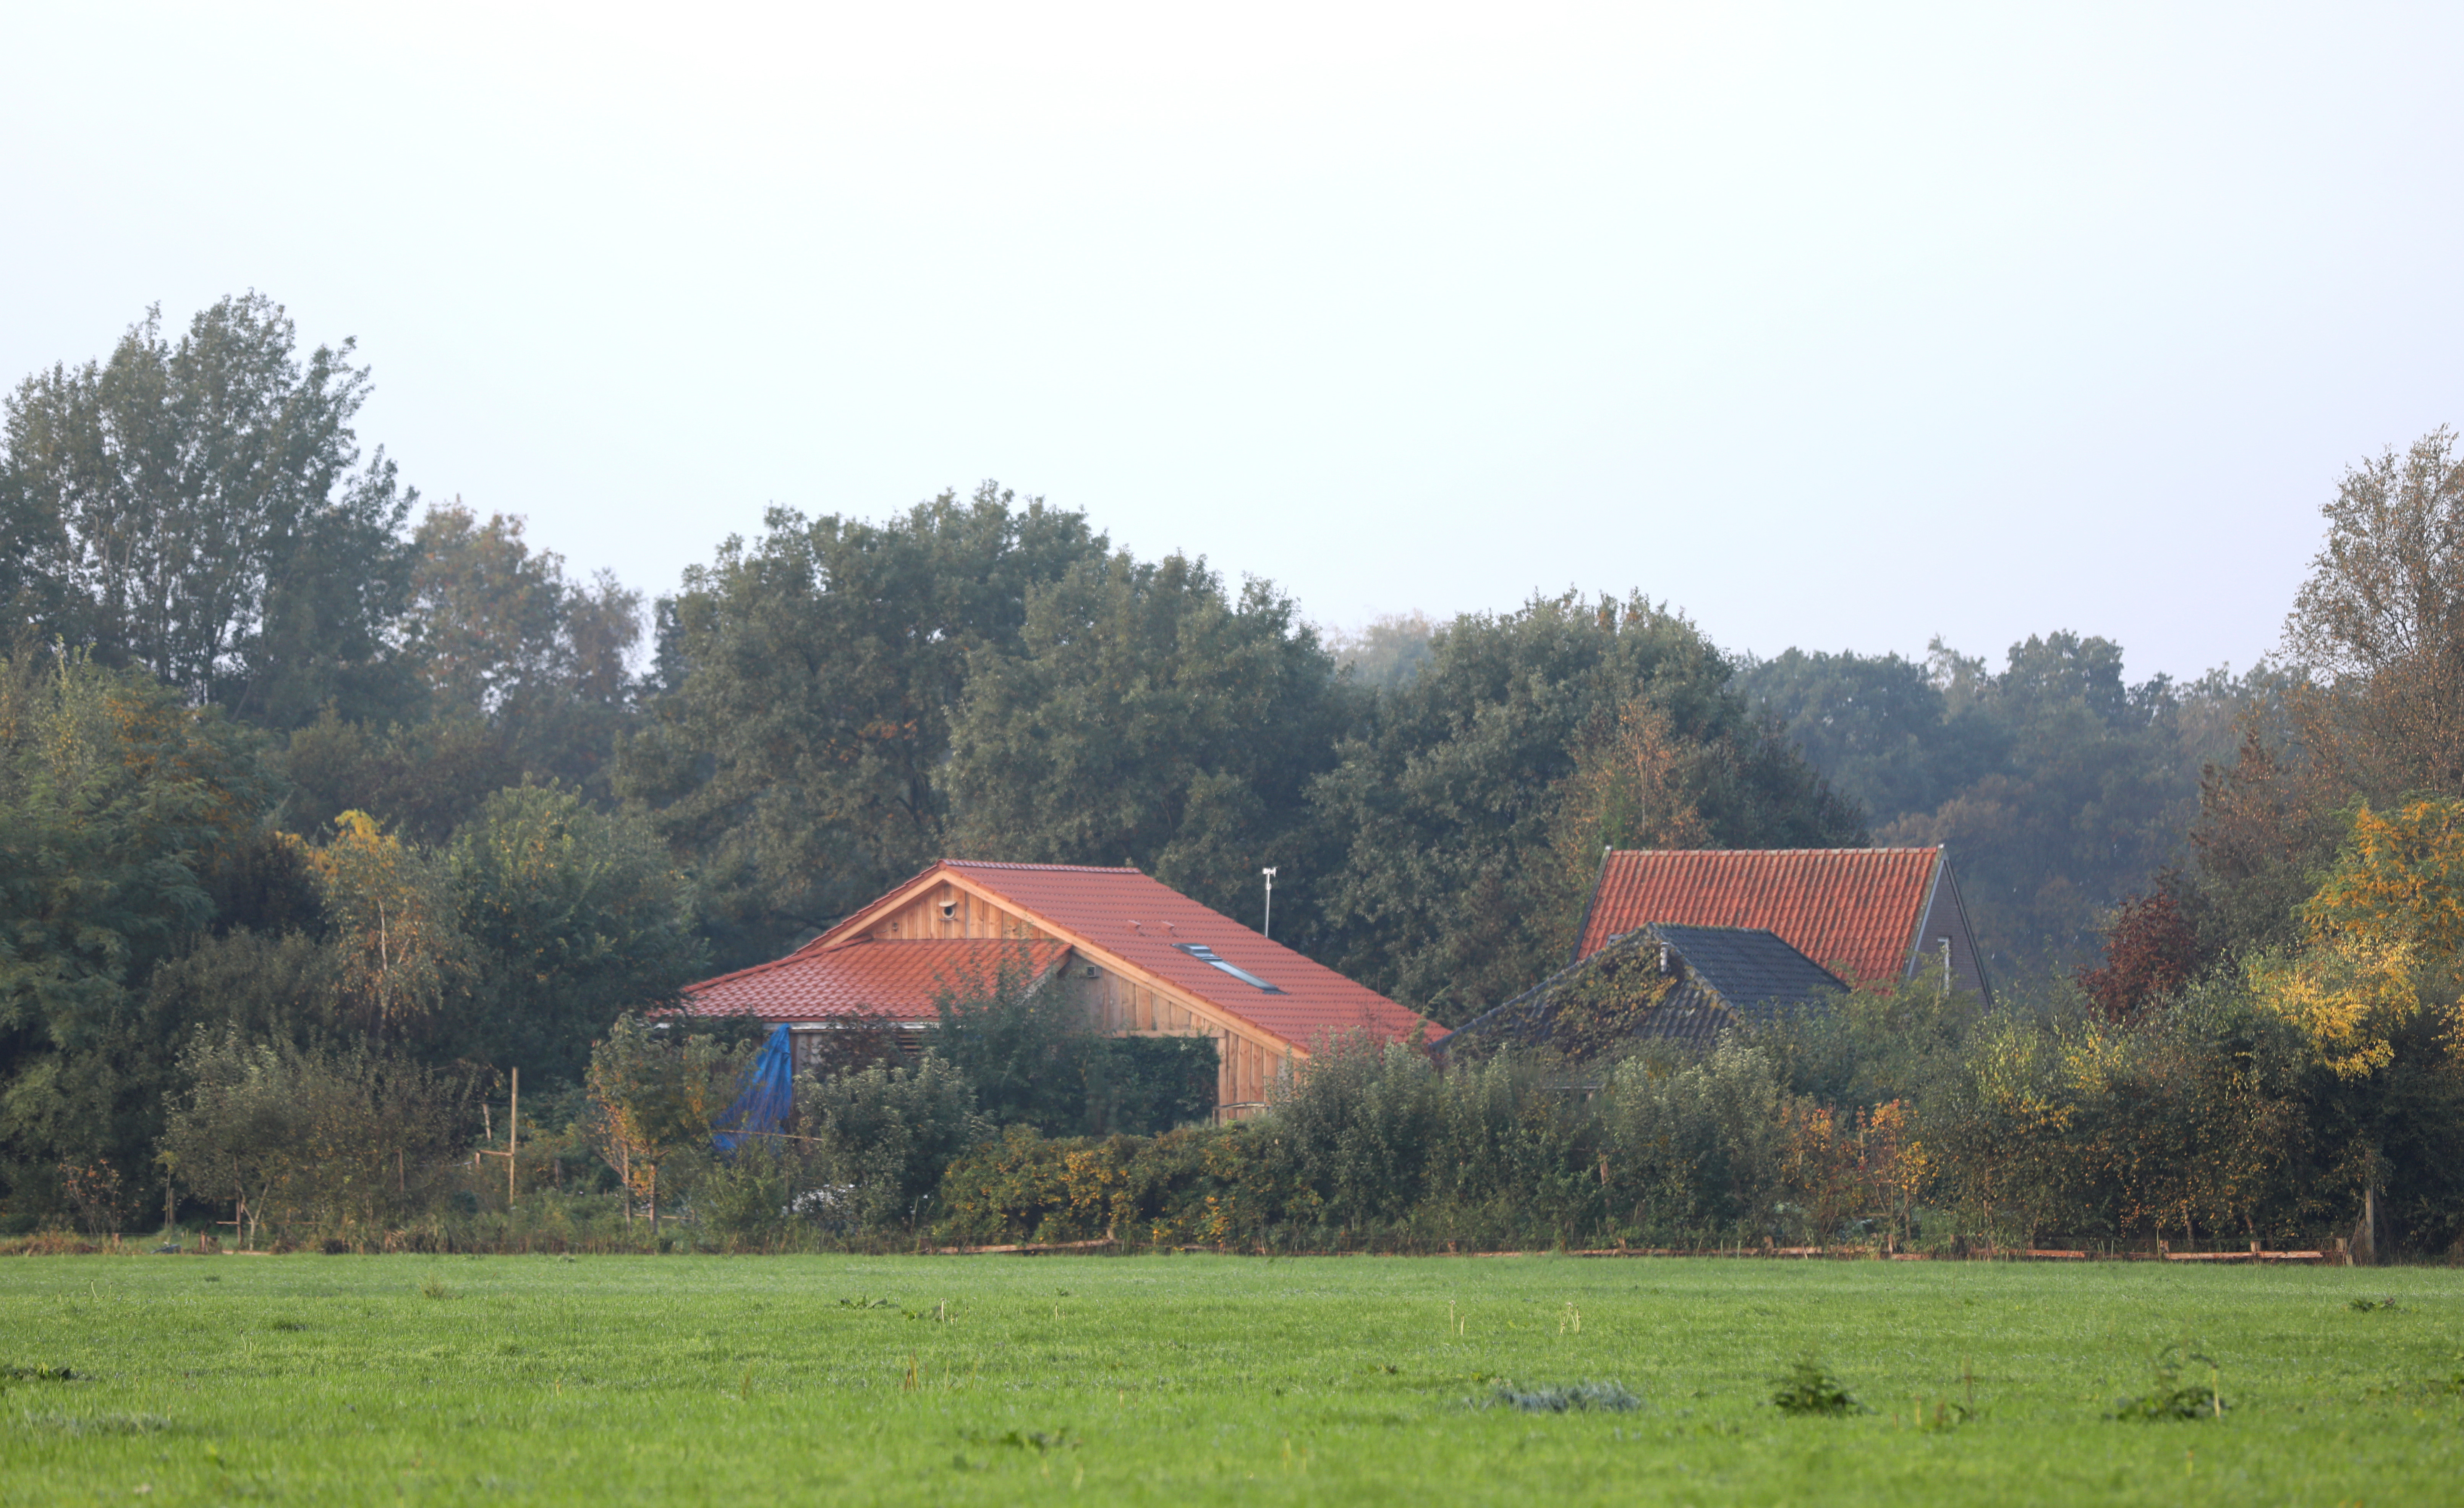 Dutch police question man over farmhouse where isolated family found